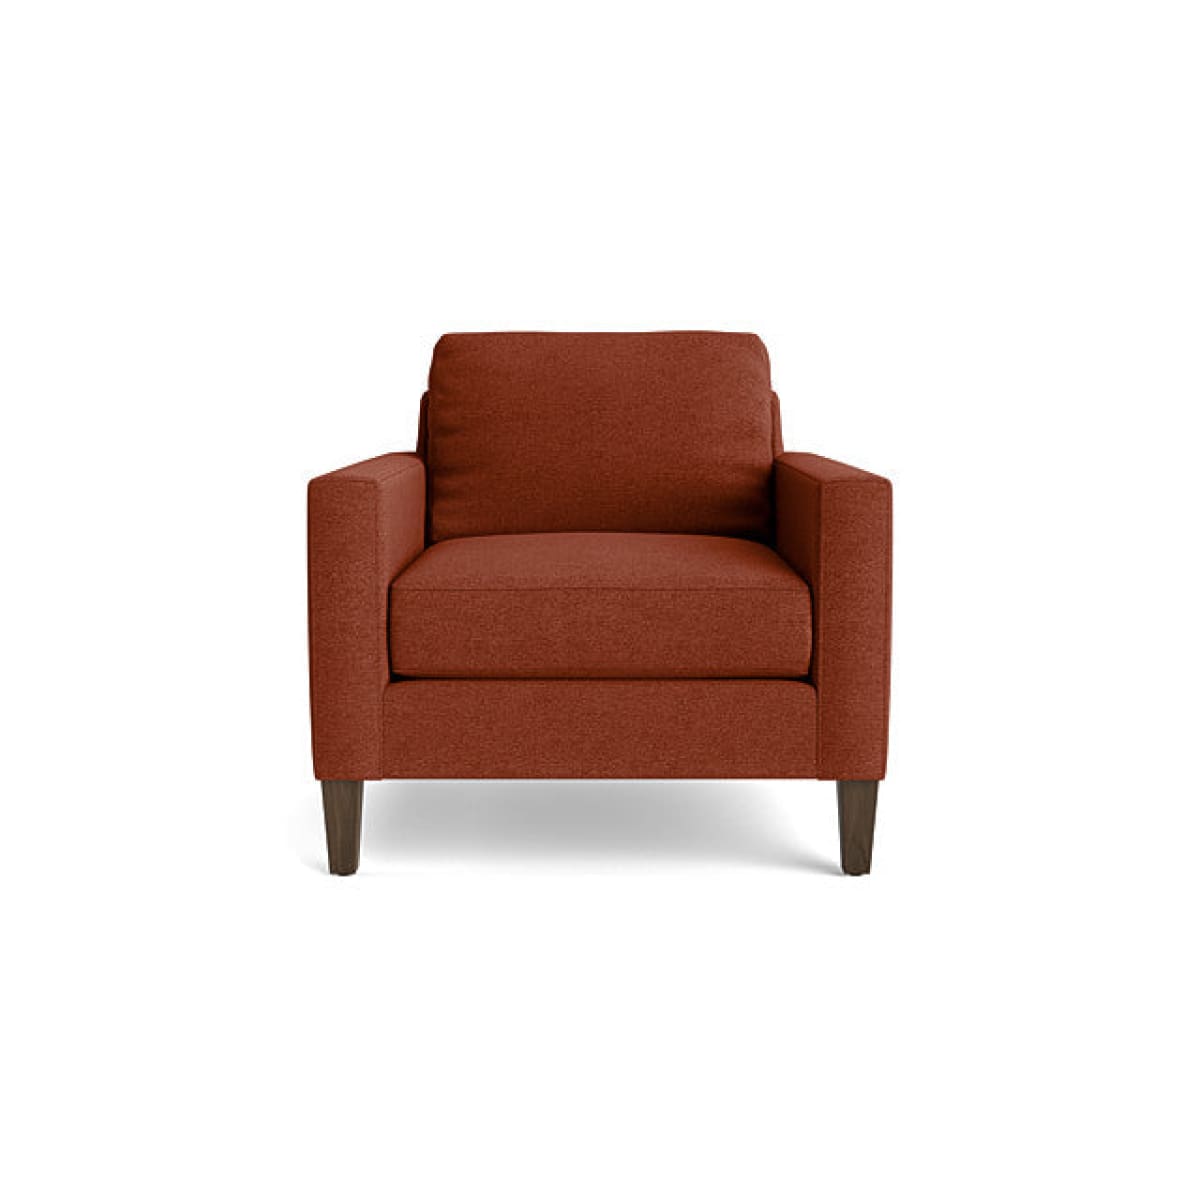 Kent Accent Chair - Entice Spice